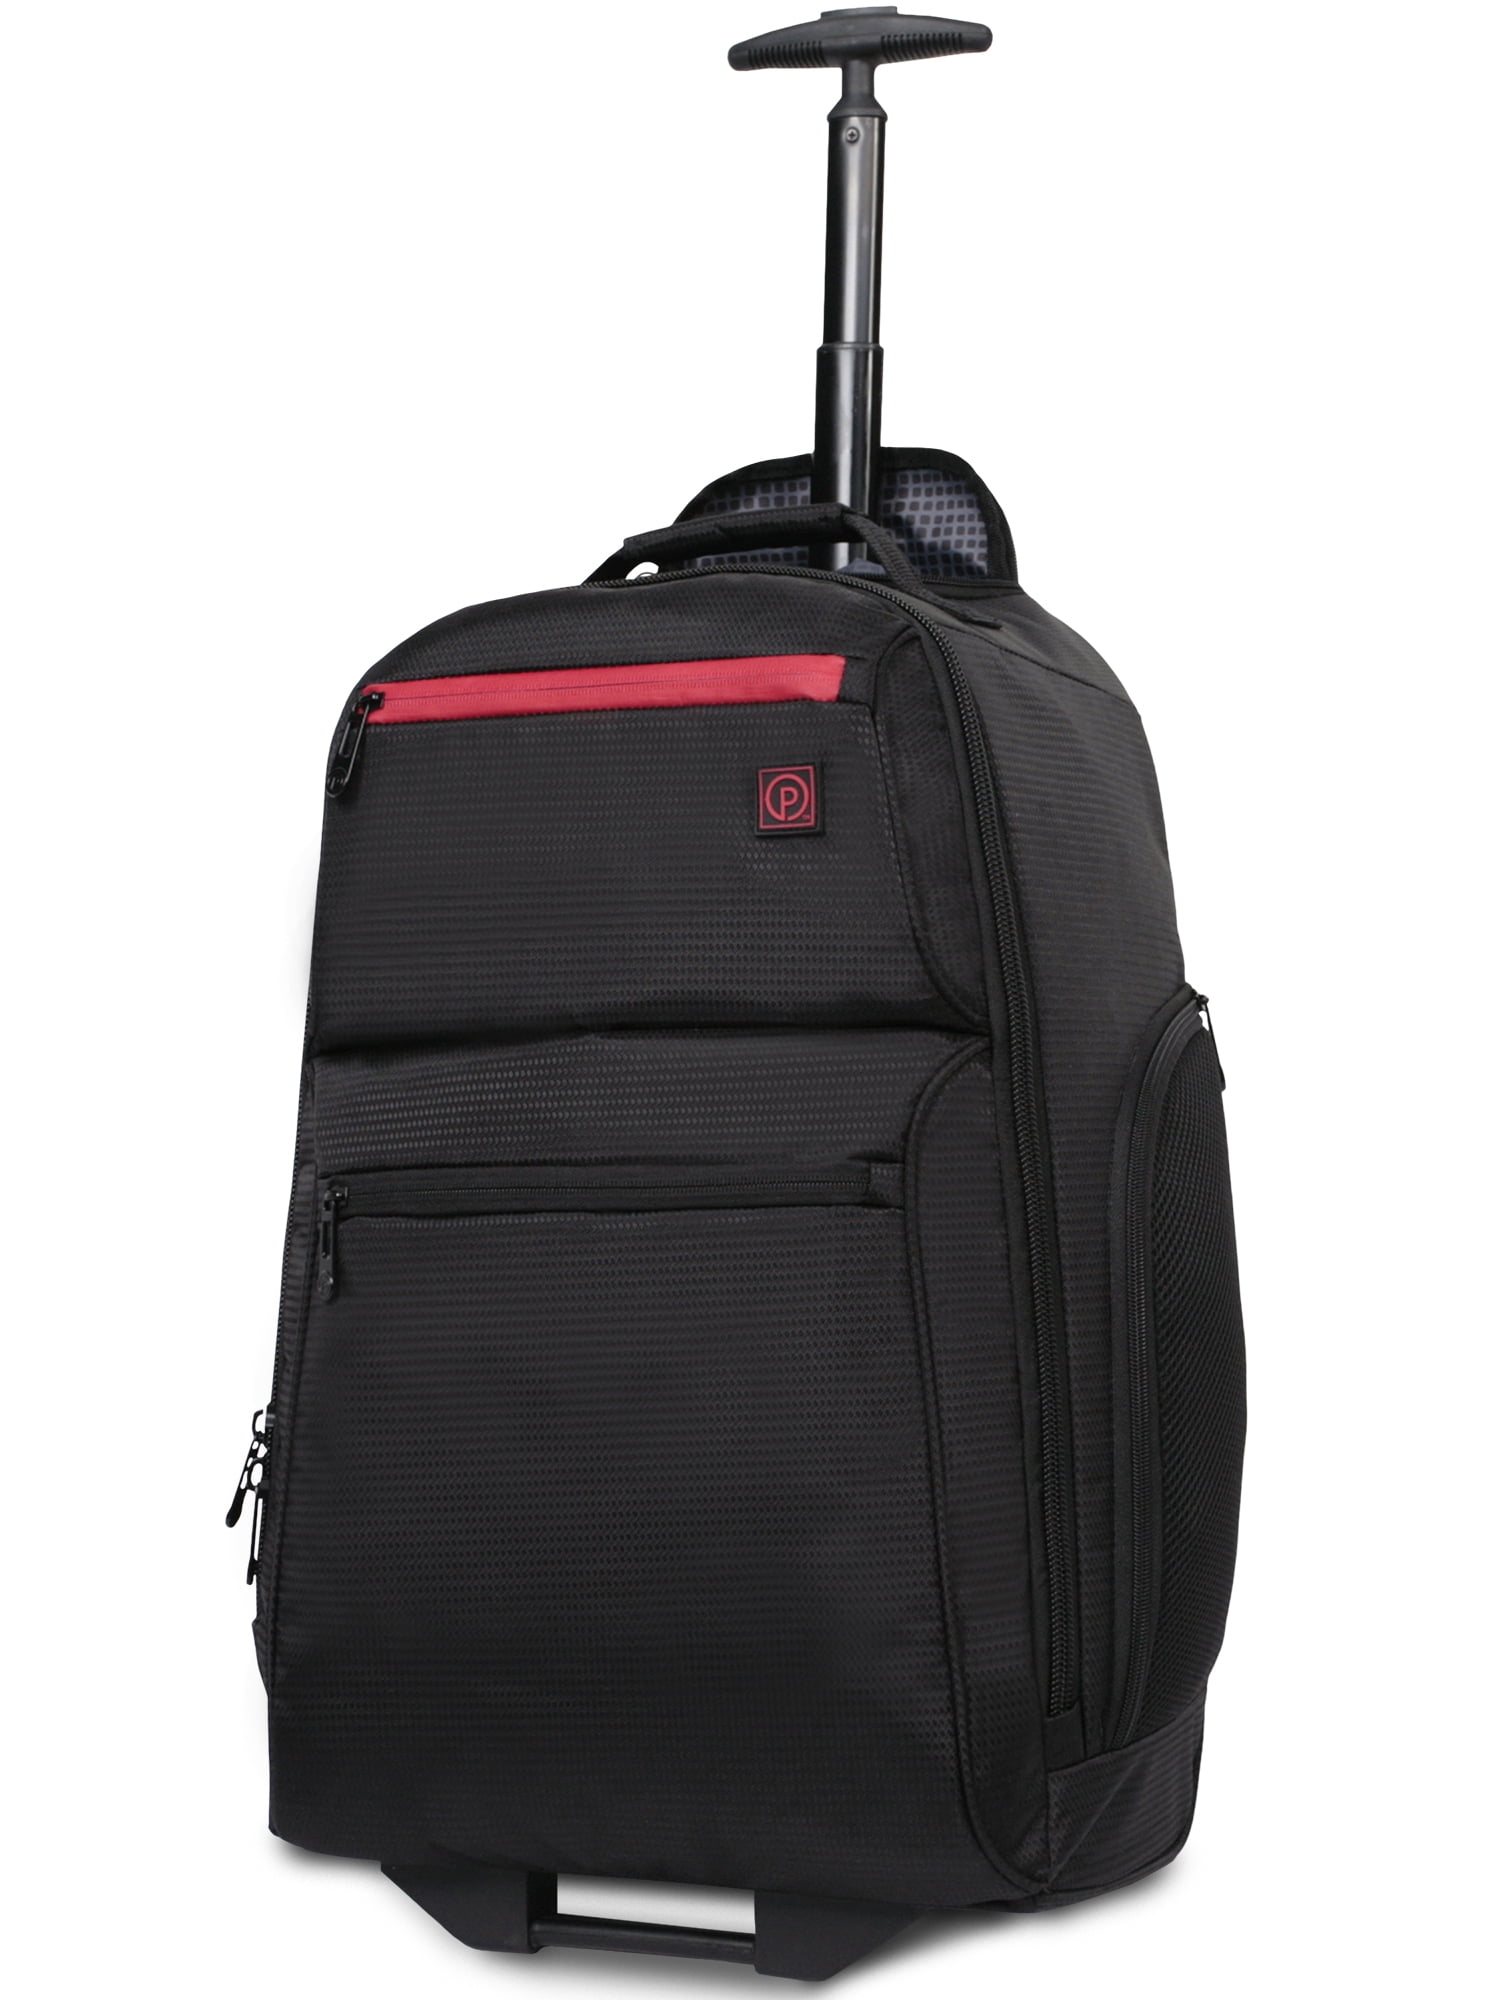 coleman 22 inch rolling backpack